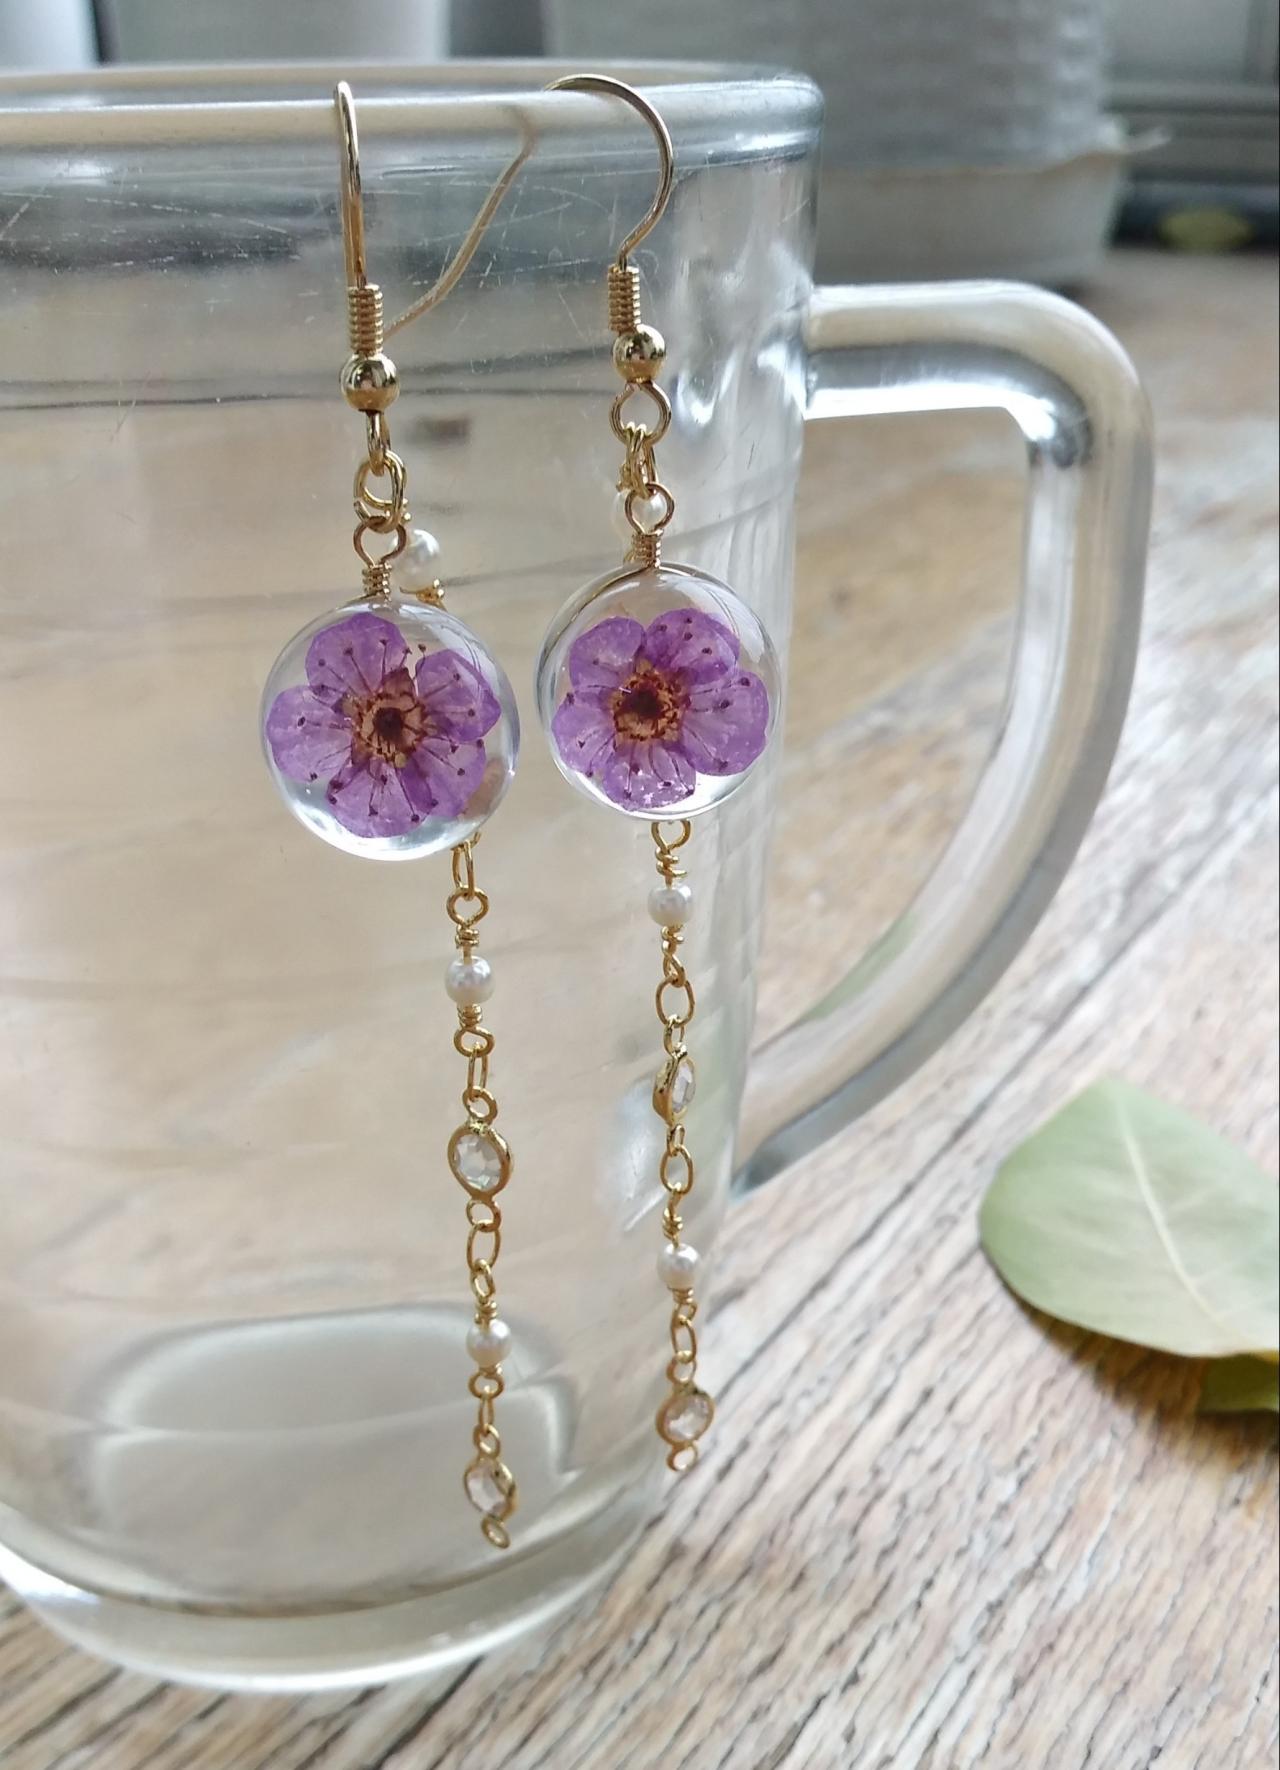 Real Flower Gold Chain Dangle Earrings// Pressed Flower Jewellery// Dried Flower Earrings